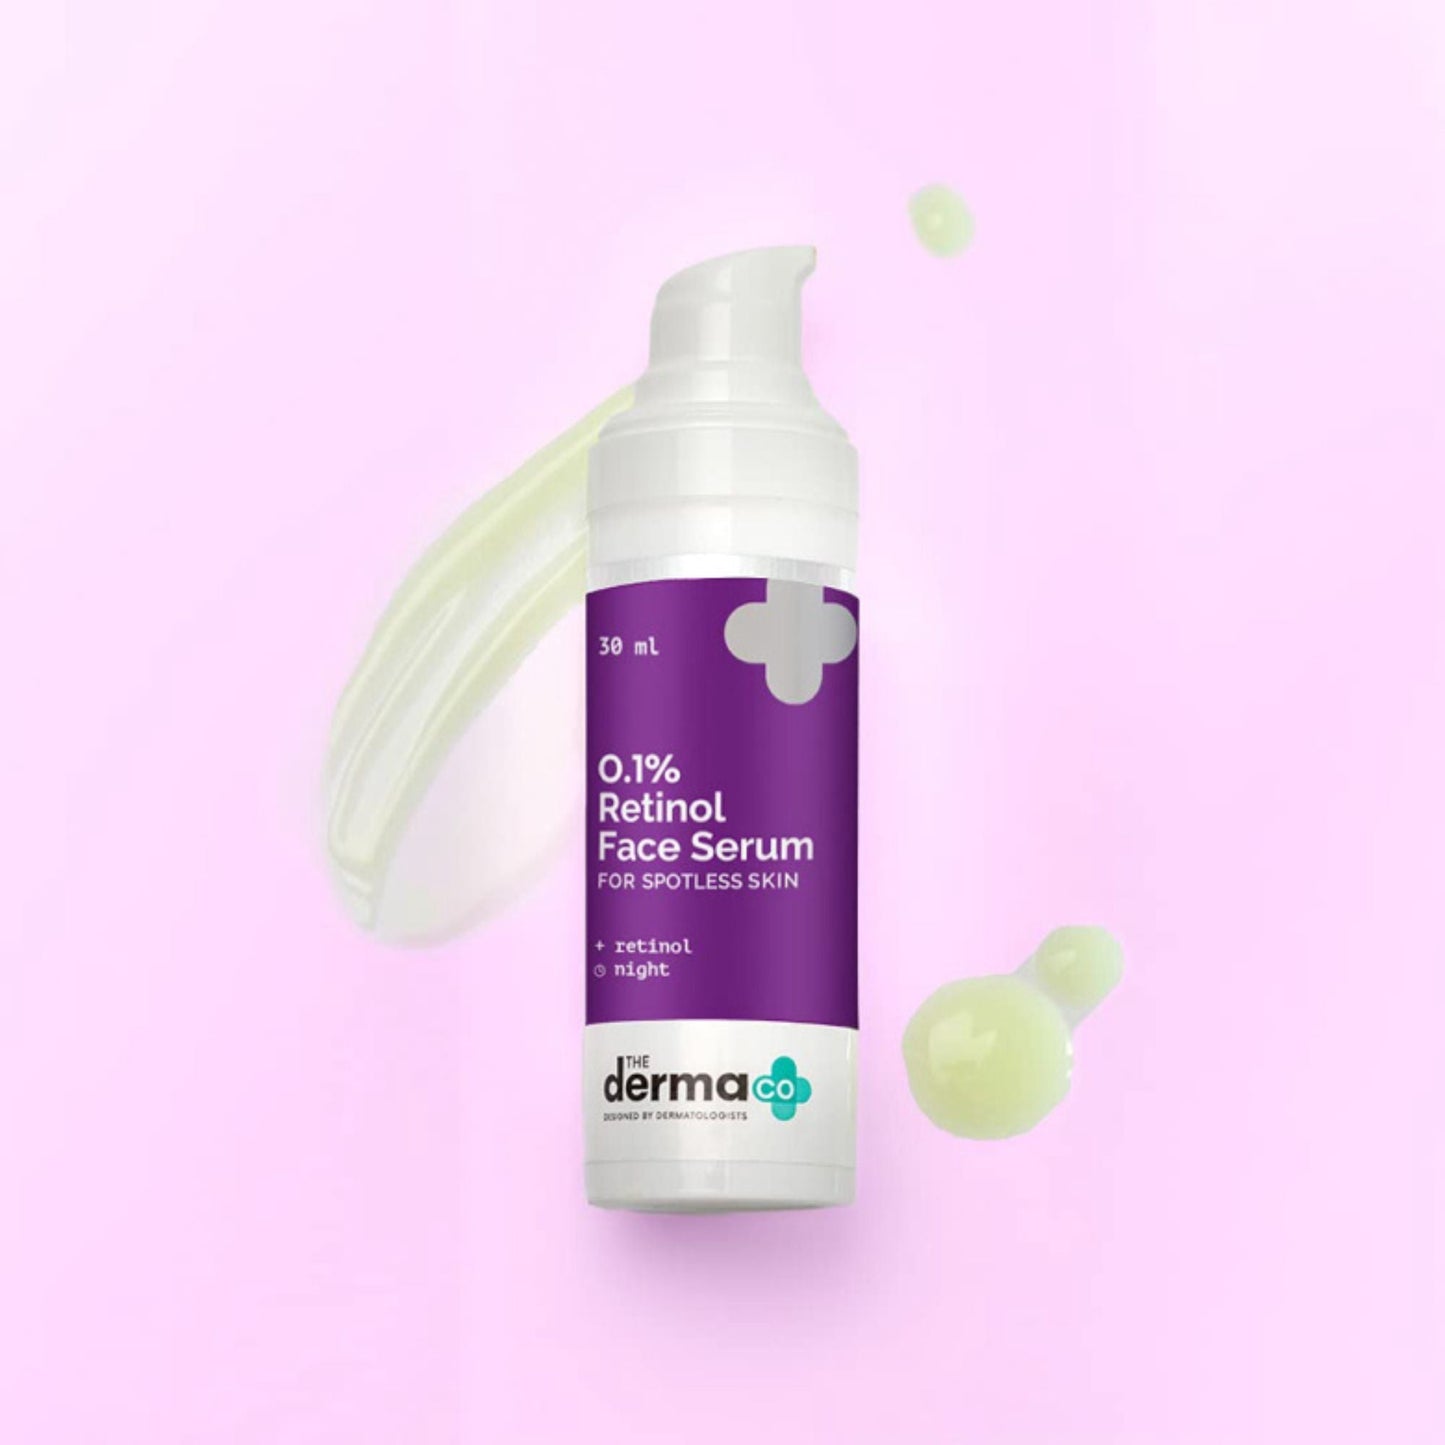 The Derma Co 0.1% Retinol Serum for Younger Looking Spotless Skin 30ml